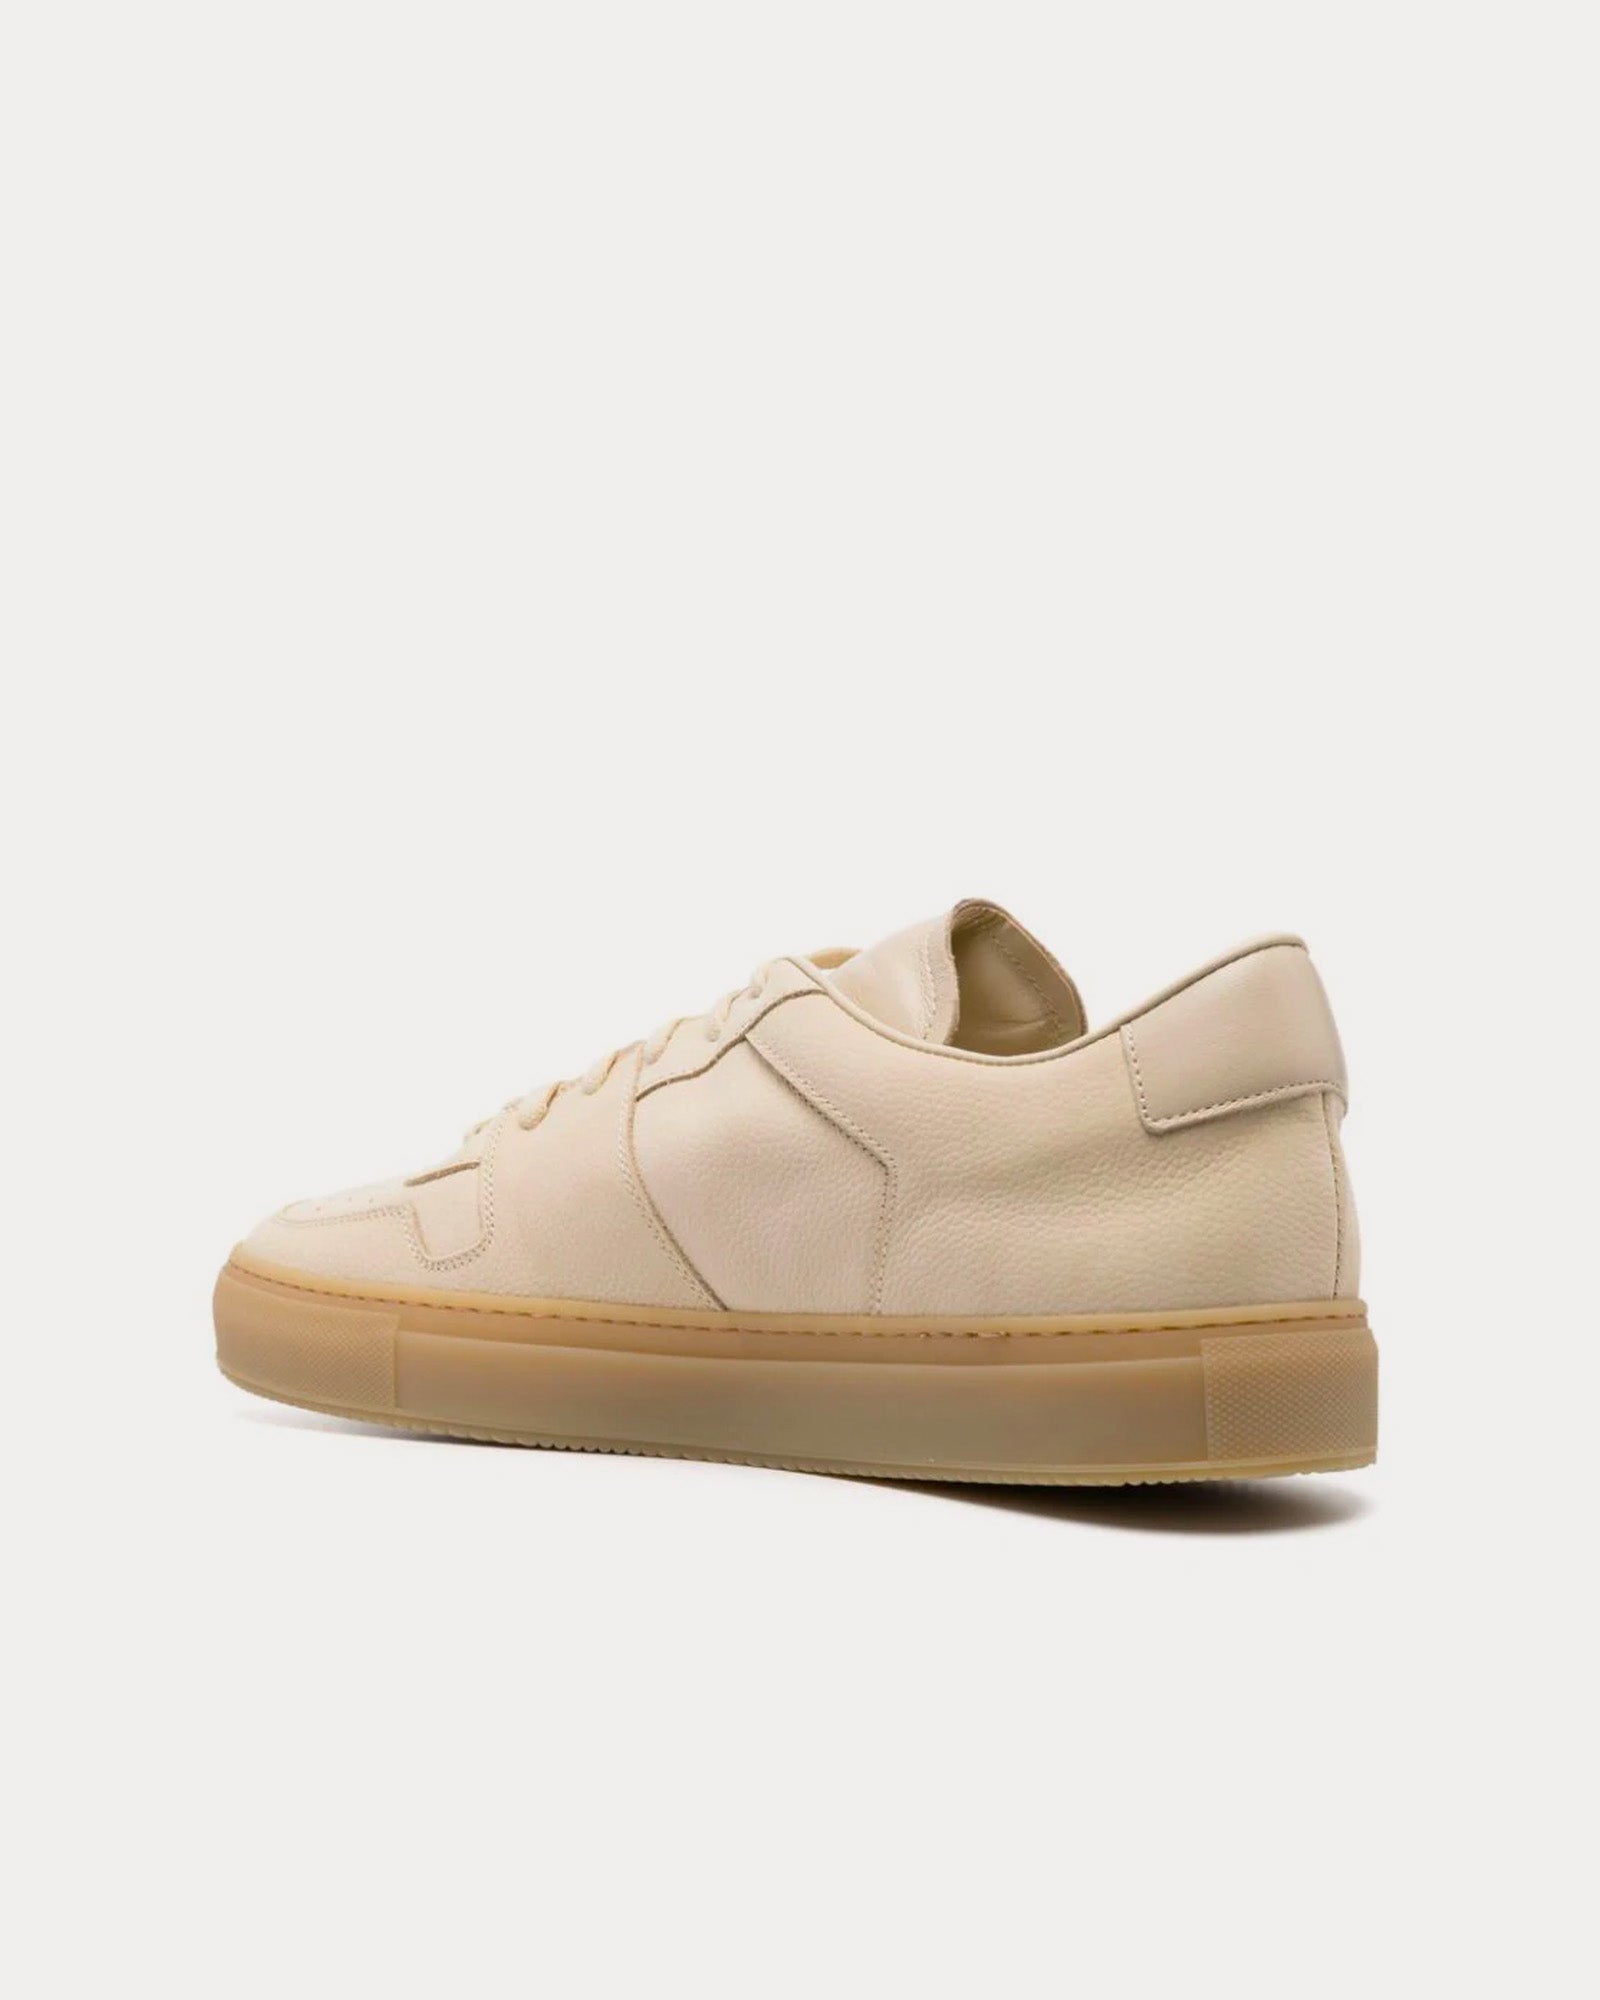 Common Projects - Decades Calf-Leather Sand Beige Low Top Sneakers